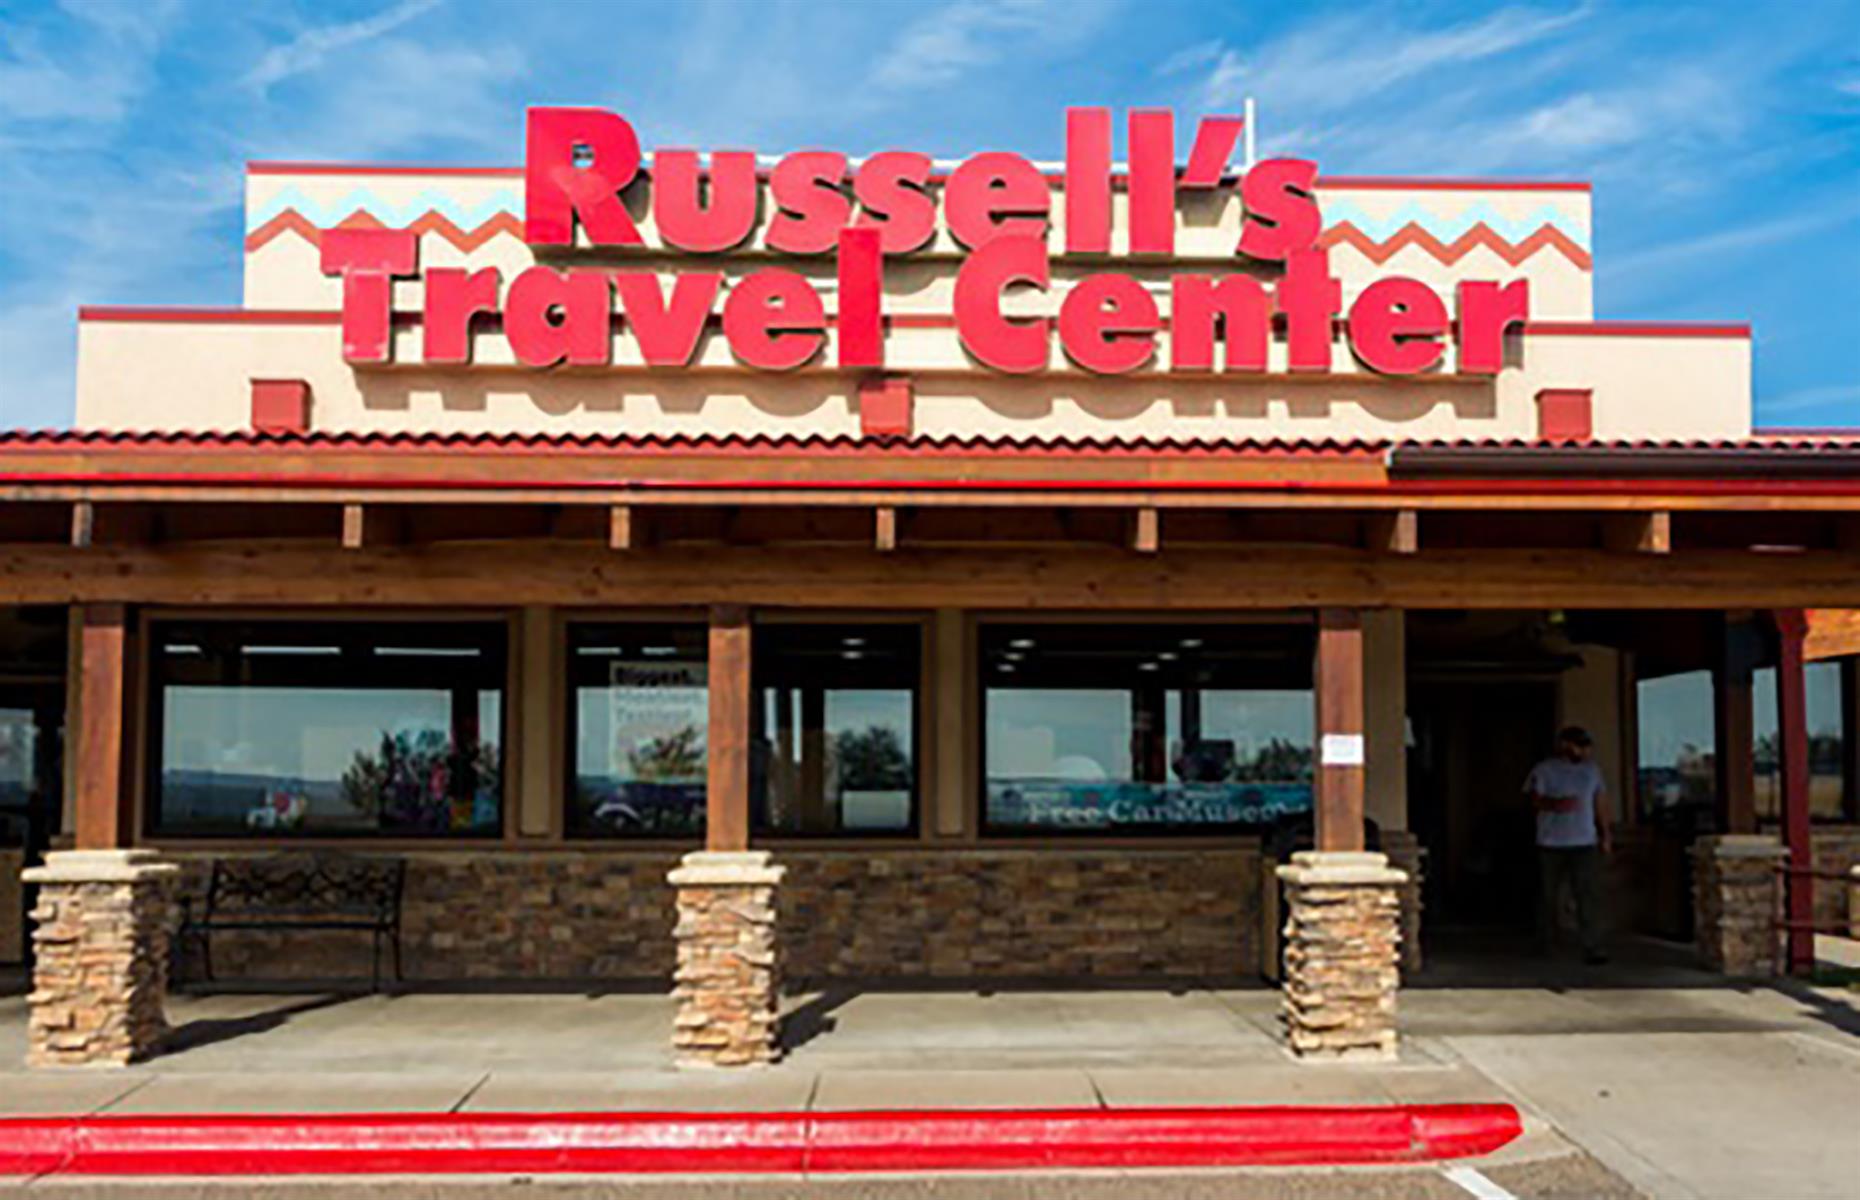 <p>On the cusp of New Mexico and Texas, Russell’s Travel Center offers truckers a historic Route 66 experience with its classic diner and <a href="https://www.yelp.com/biz/russells-travel-center-glenrio?sort_by=date_desc">vintage car museum</a>. While there are plenty of standard burgers on offer, why not opt for a Tex-Mex dish. <a href="http://www.russellsttc.com/diner.php">The burrito plate</a> with beans, rice and green or red chili will keep you full until your next stop.</p>